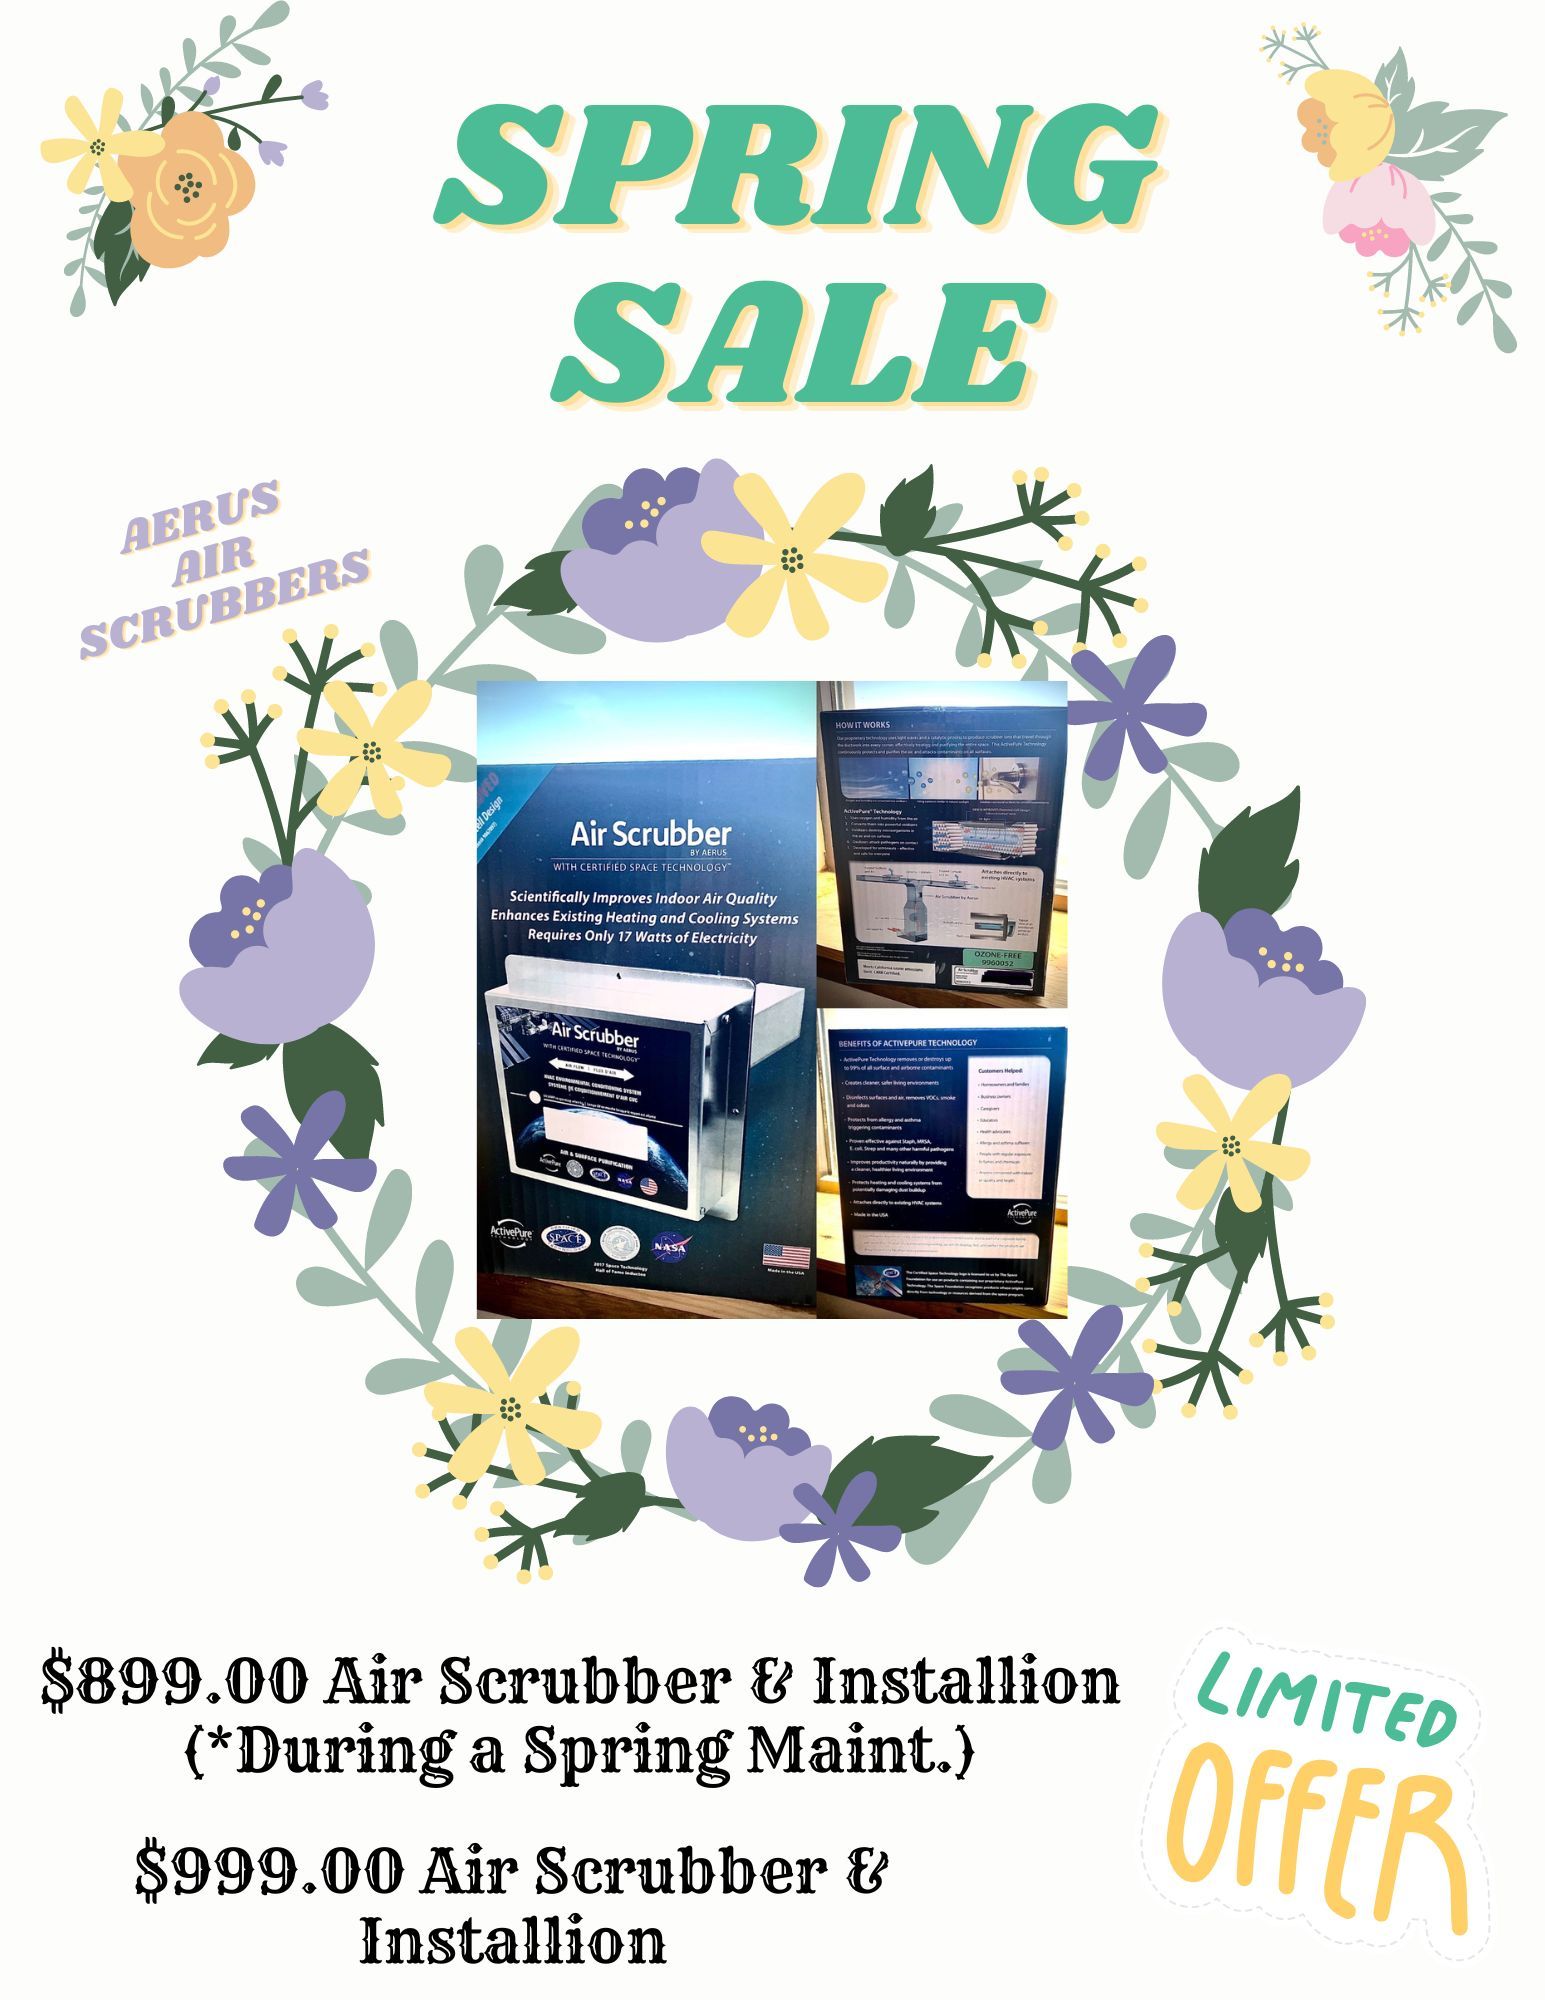 A spring sale poster with flowers and a picture of an air scrubber